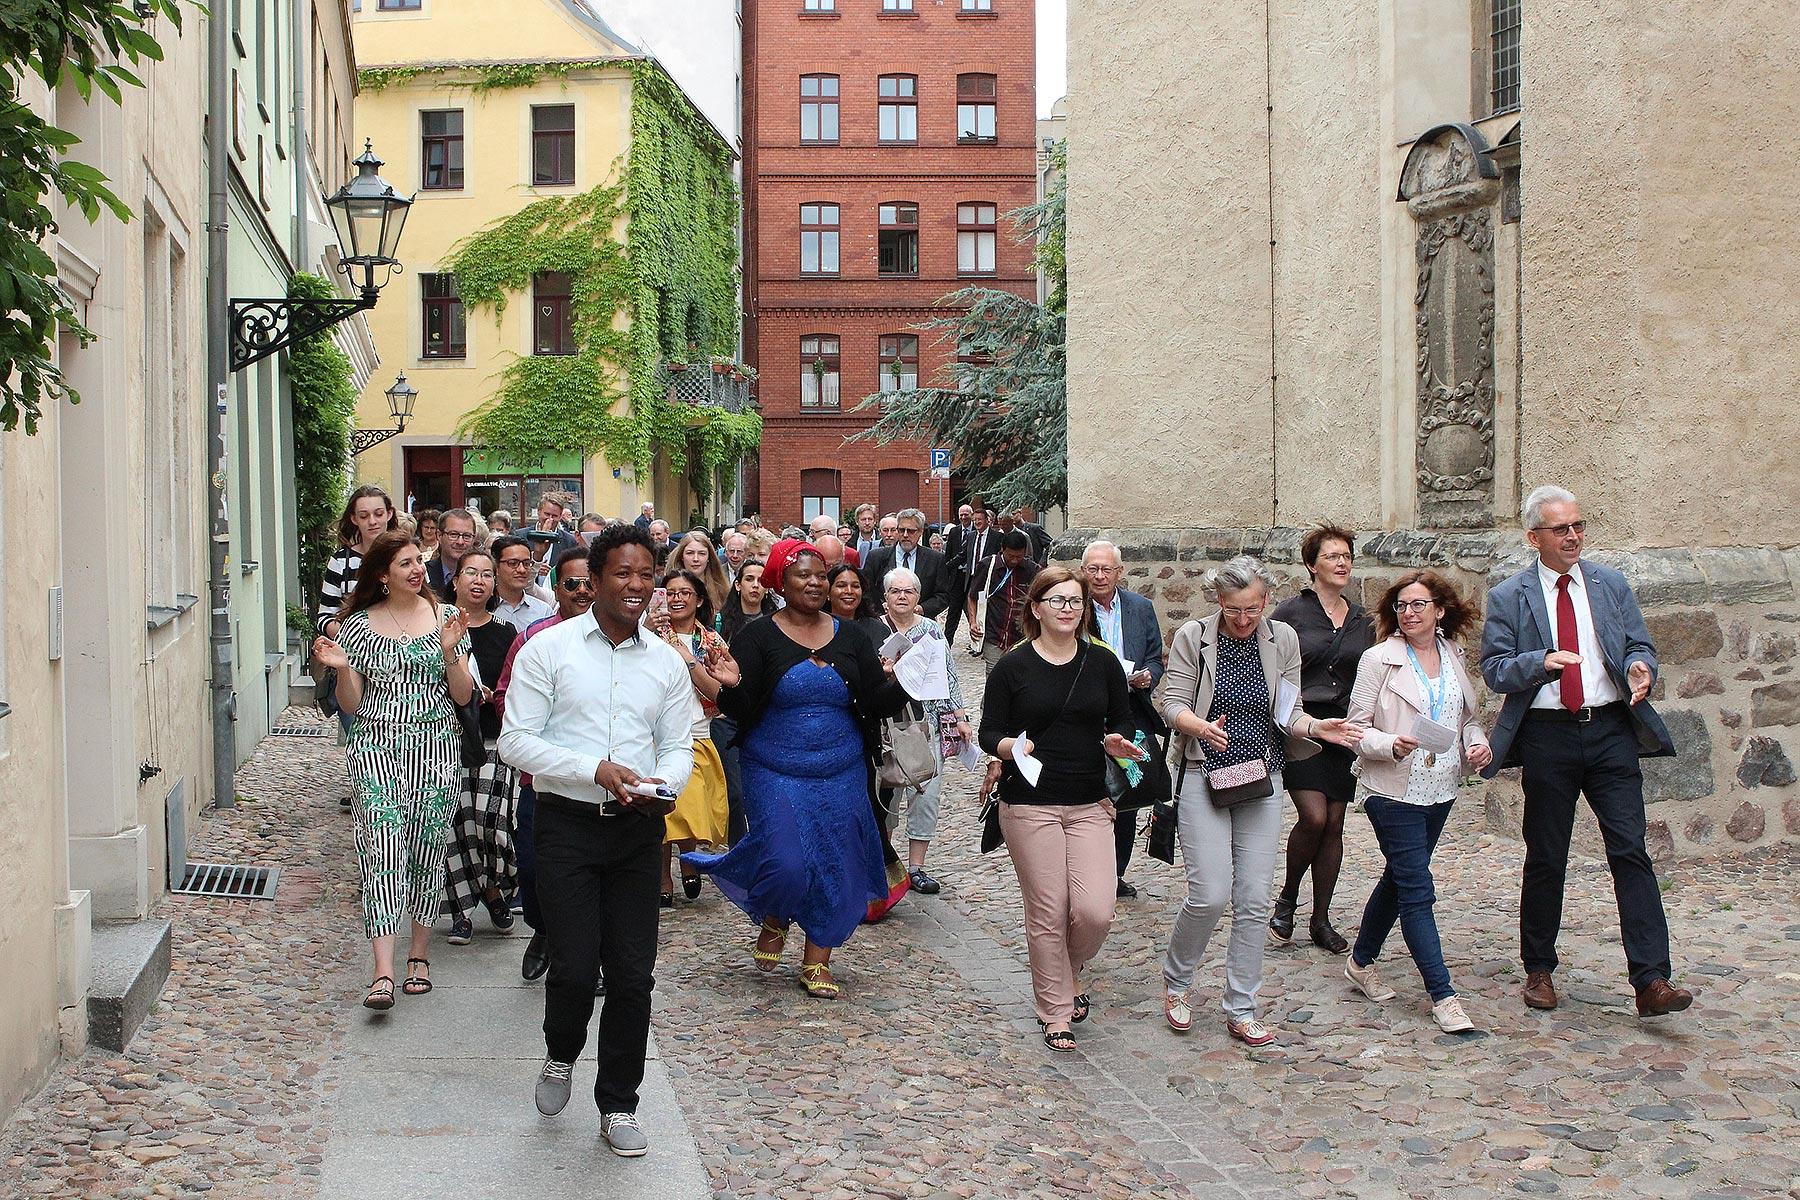 International guests move from the Town Church to the premises of the LWF Center Wittenberg and the ELCA Wittenberg Center during the joint anniversary celebrations. Photo: GNC/LWF Florian HÃ¼bner